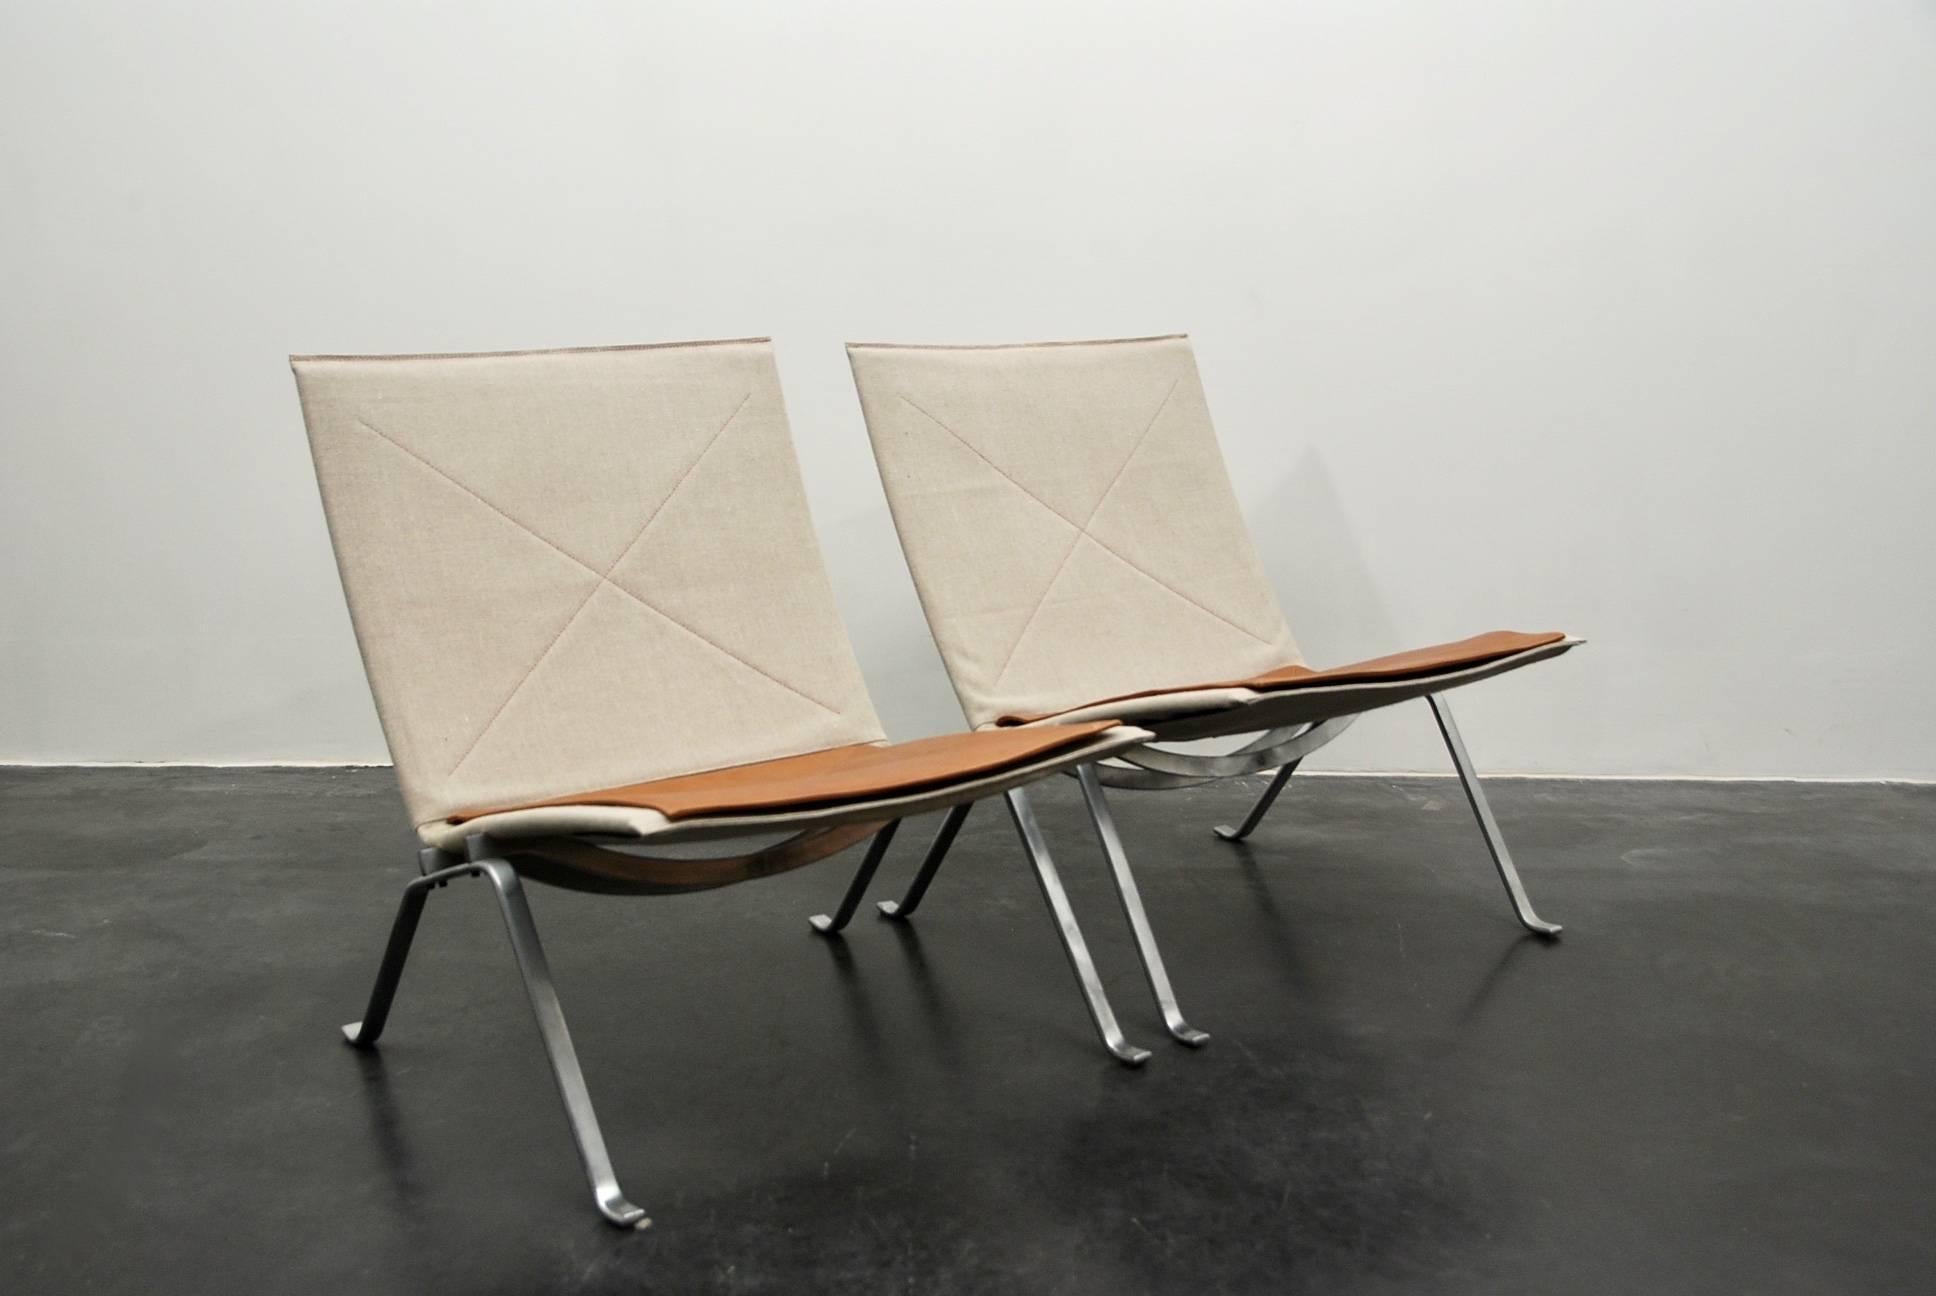 Poul Kjærholm PK22 lounge chair for E. Kold Christensen, first edition, Denmark, 1956. Dull chromium-plated steel, new hand upholstered in canvas with leather deep cognac color flat seat cushion.